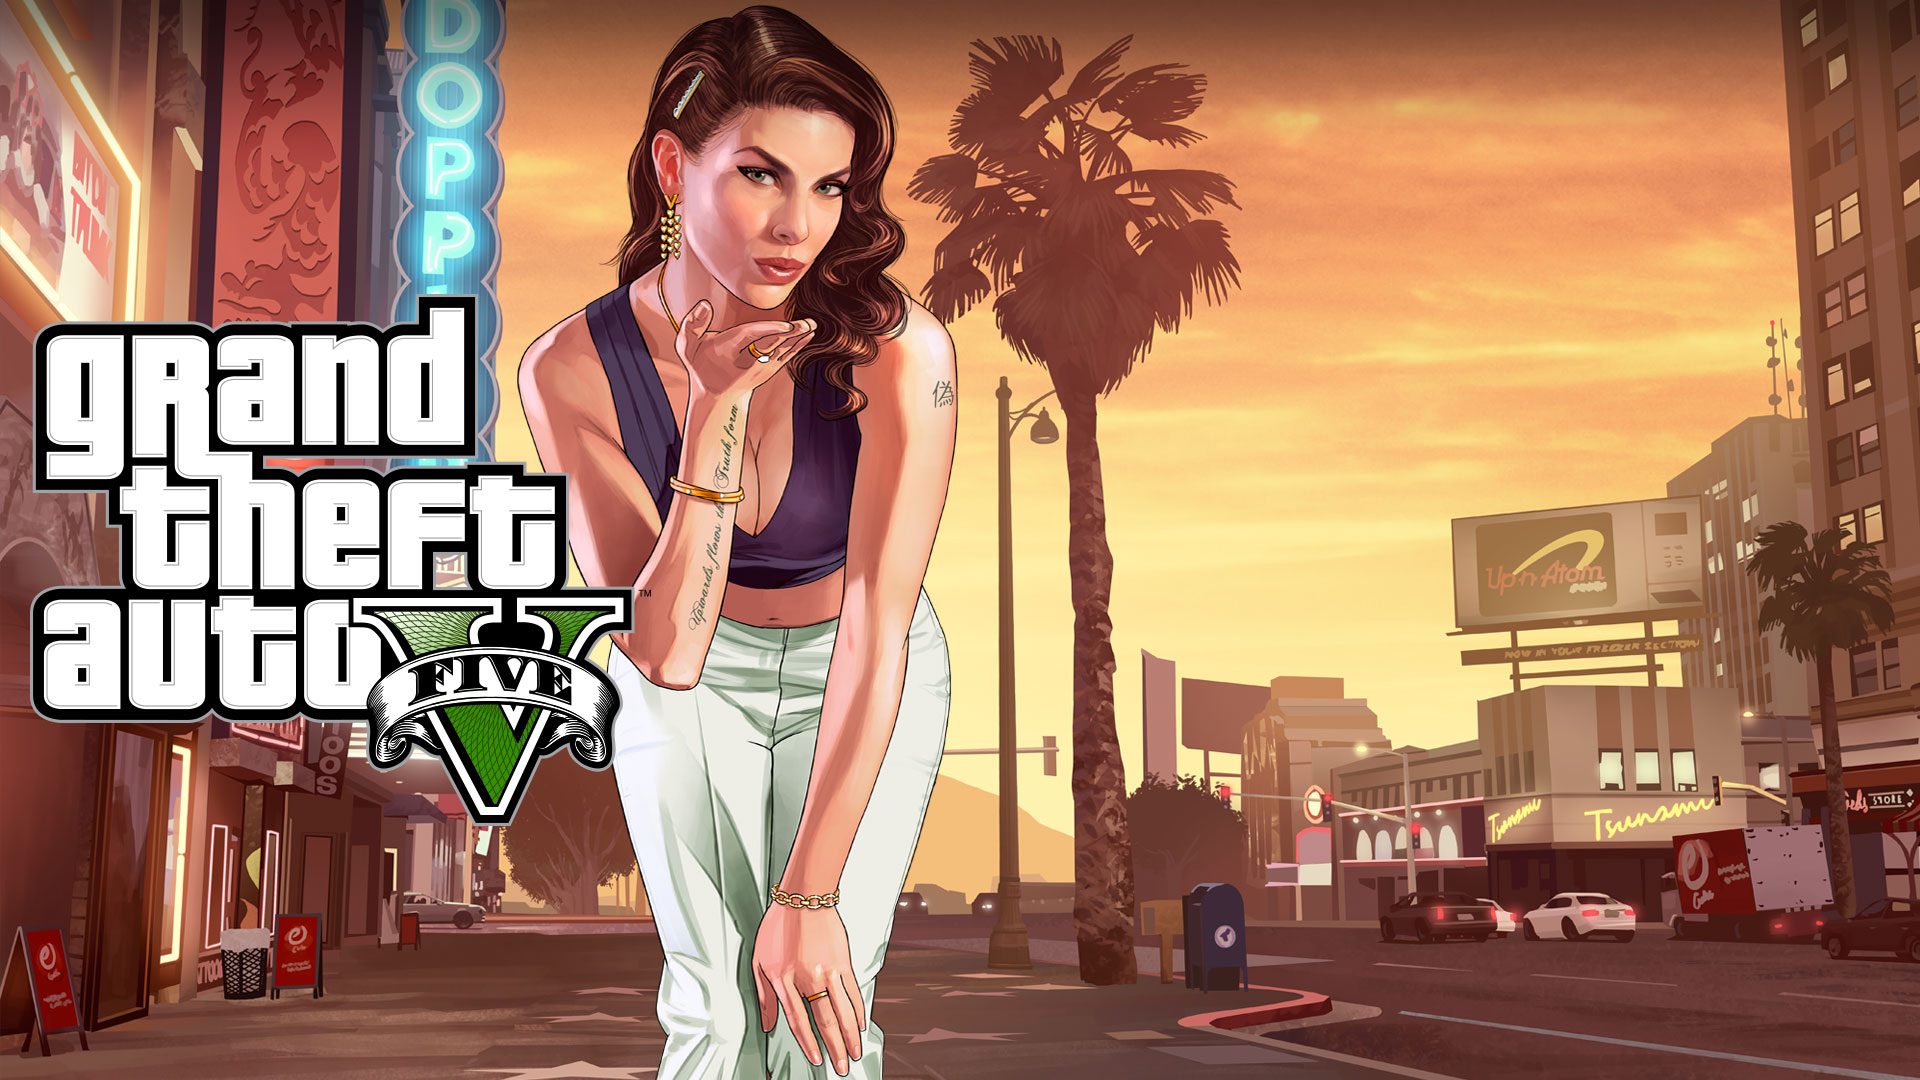 GTA V PC Download Game for free